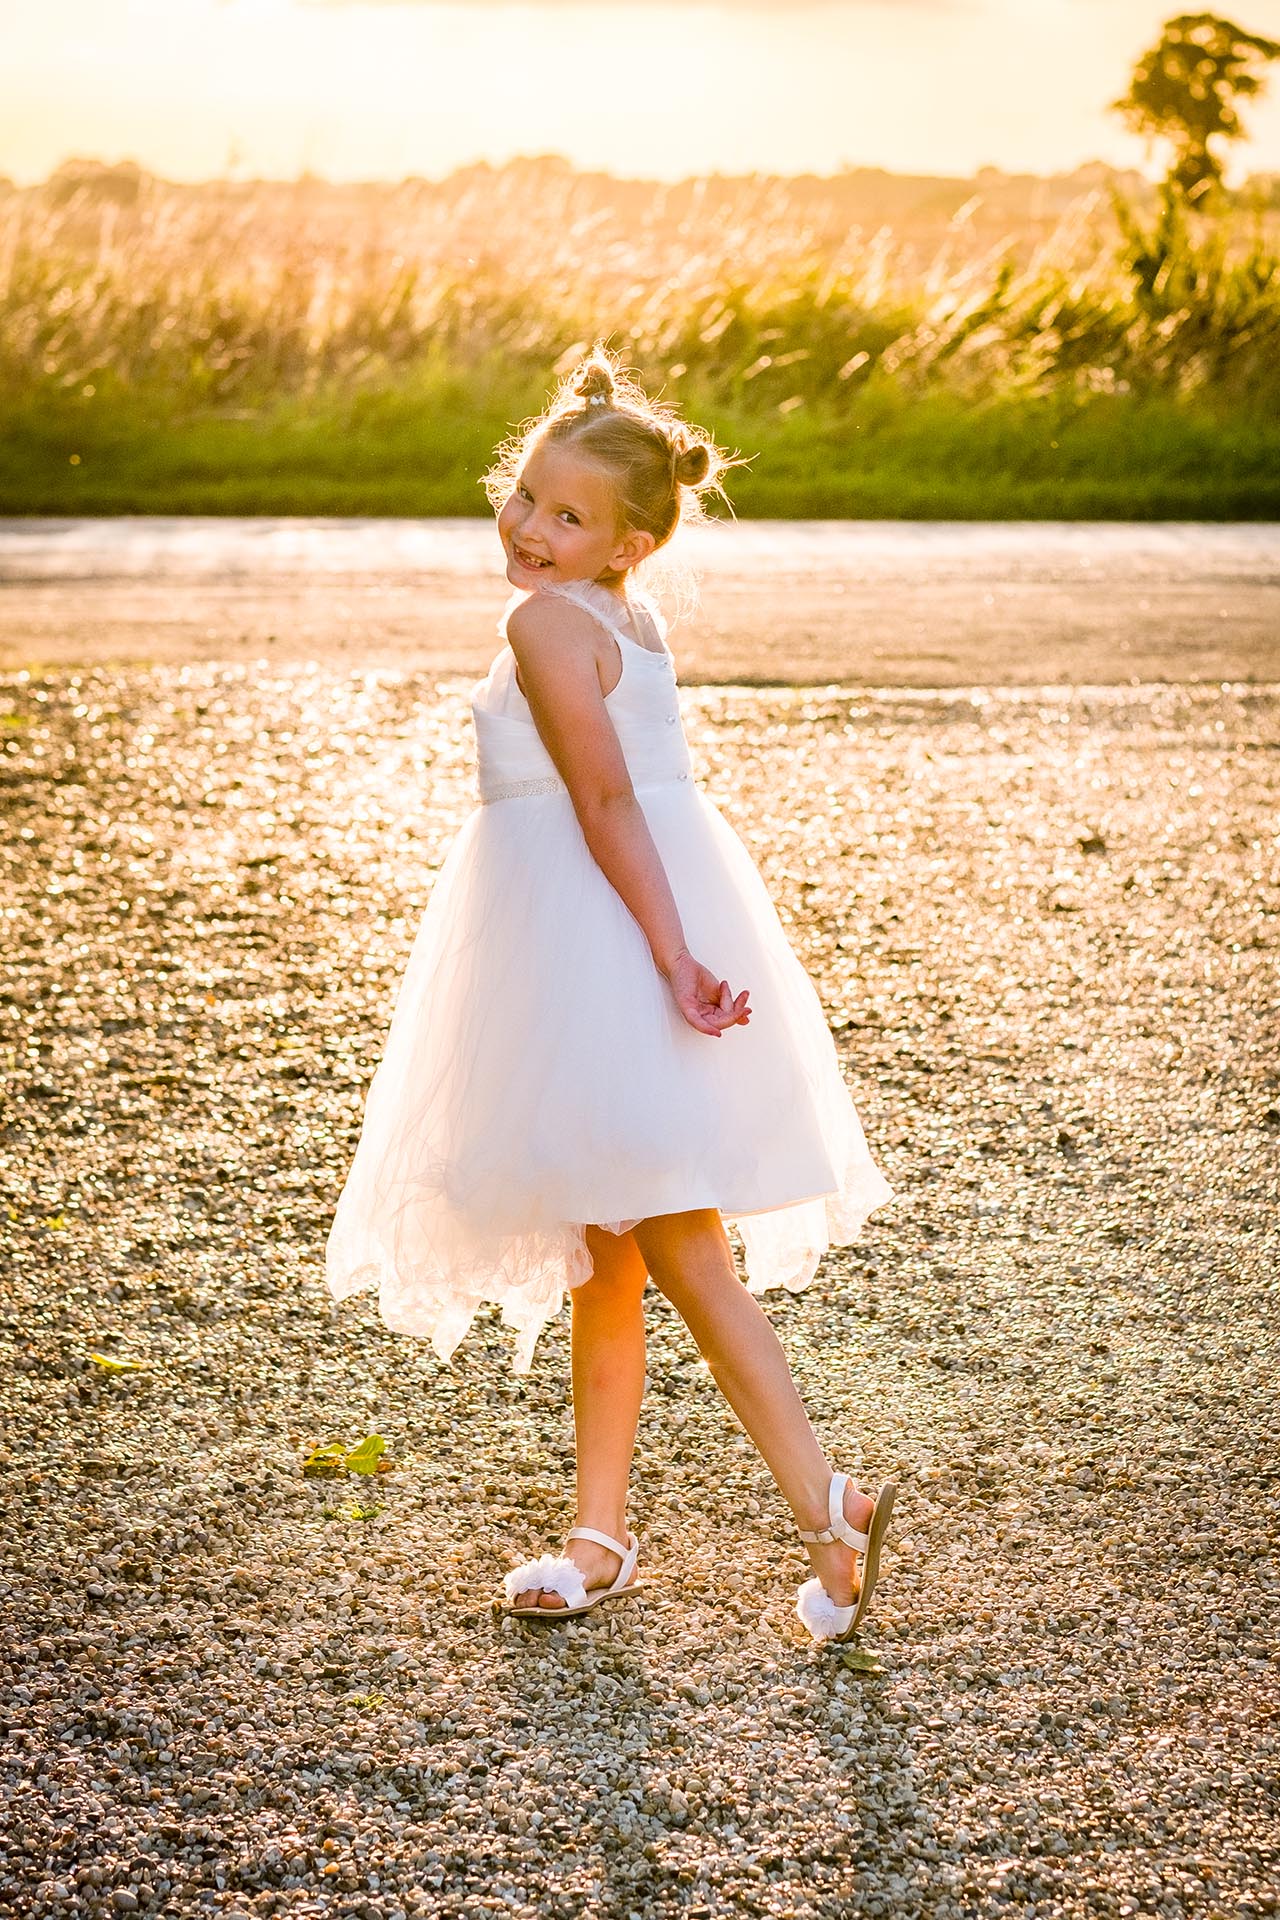 Golden light photograph by Essex wedding photographer at The Compasses at Pattiswick